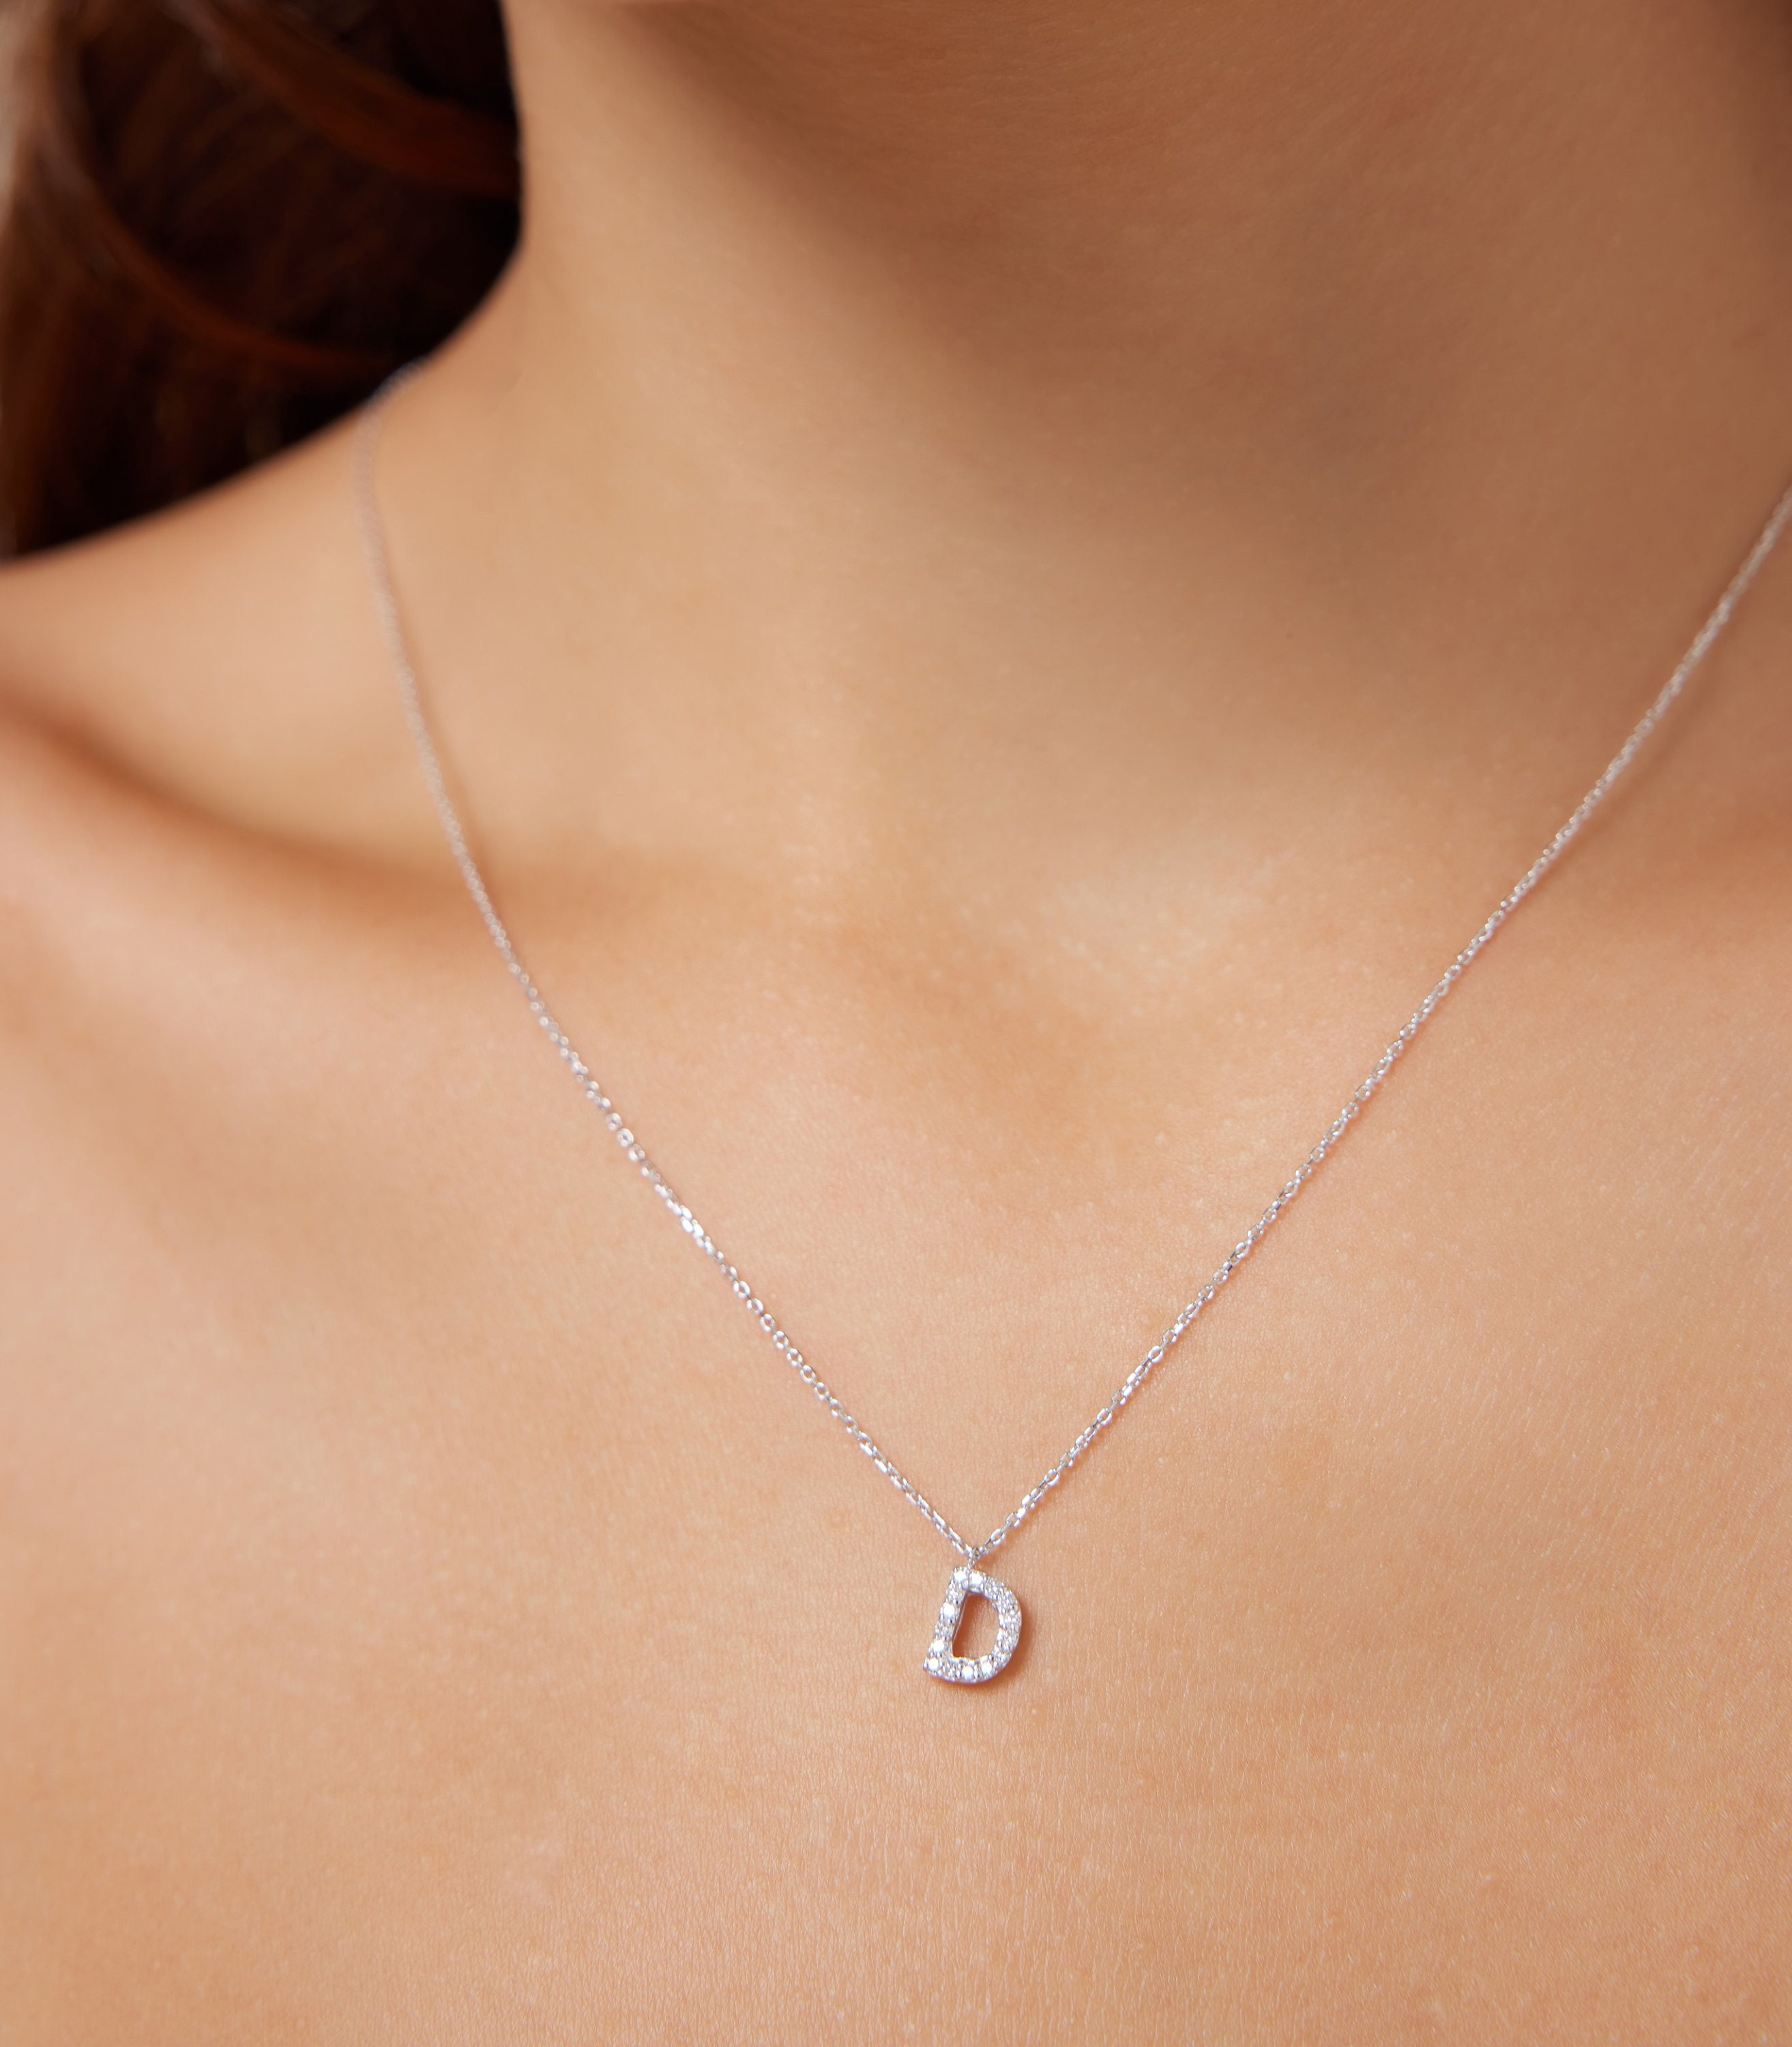 Diamond Initial Necklace,14K Solid White Gold Diamond Letter Necklace